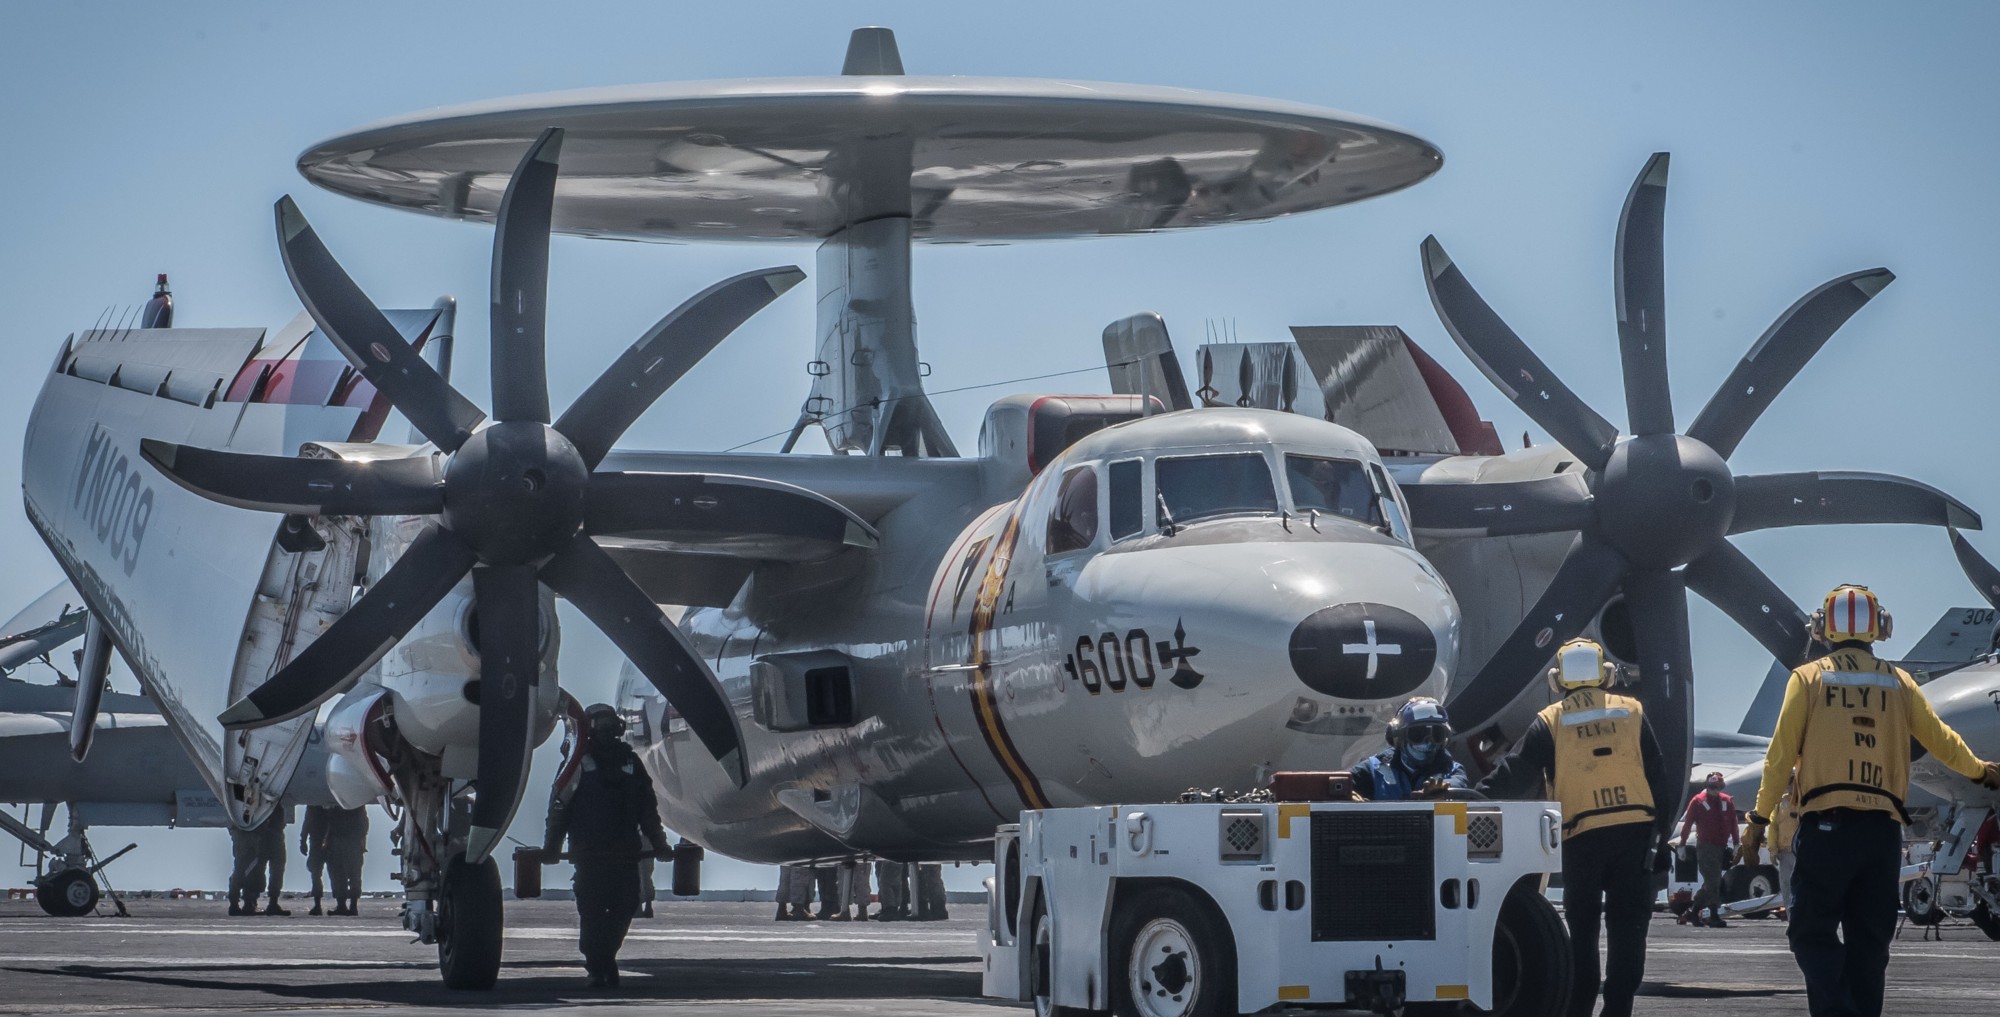 vaw-116 sun kings airborne command control squadron carrier early warning cvw-17 uss theodore roosevelt cvn-71 60